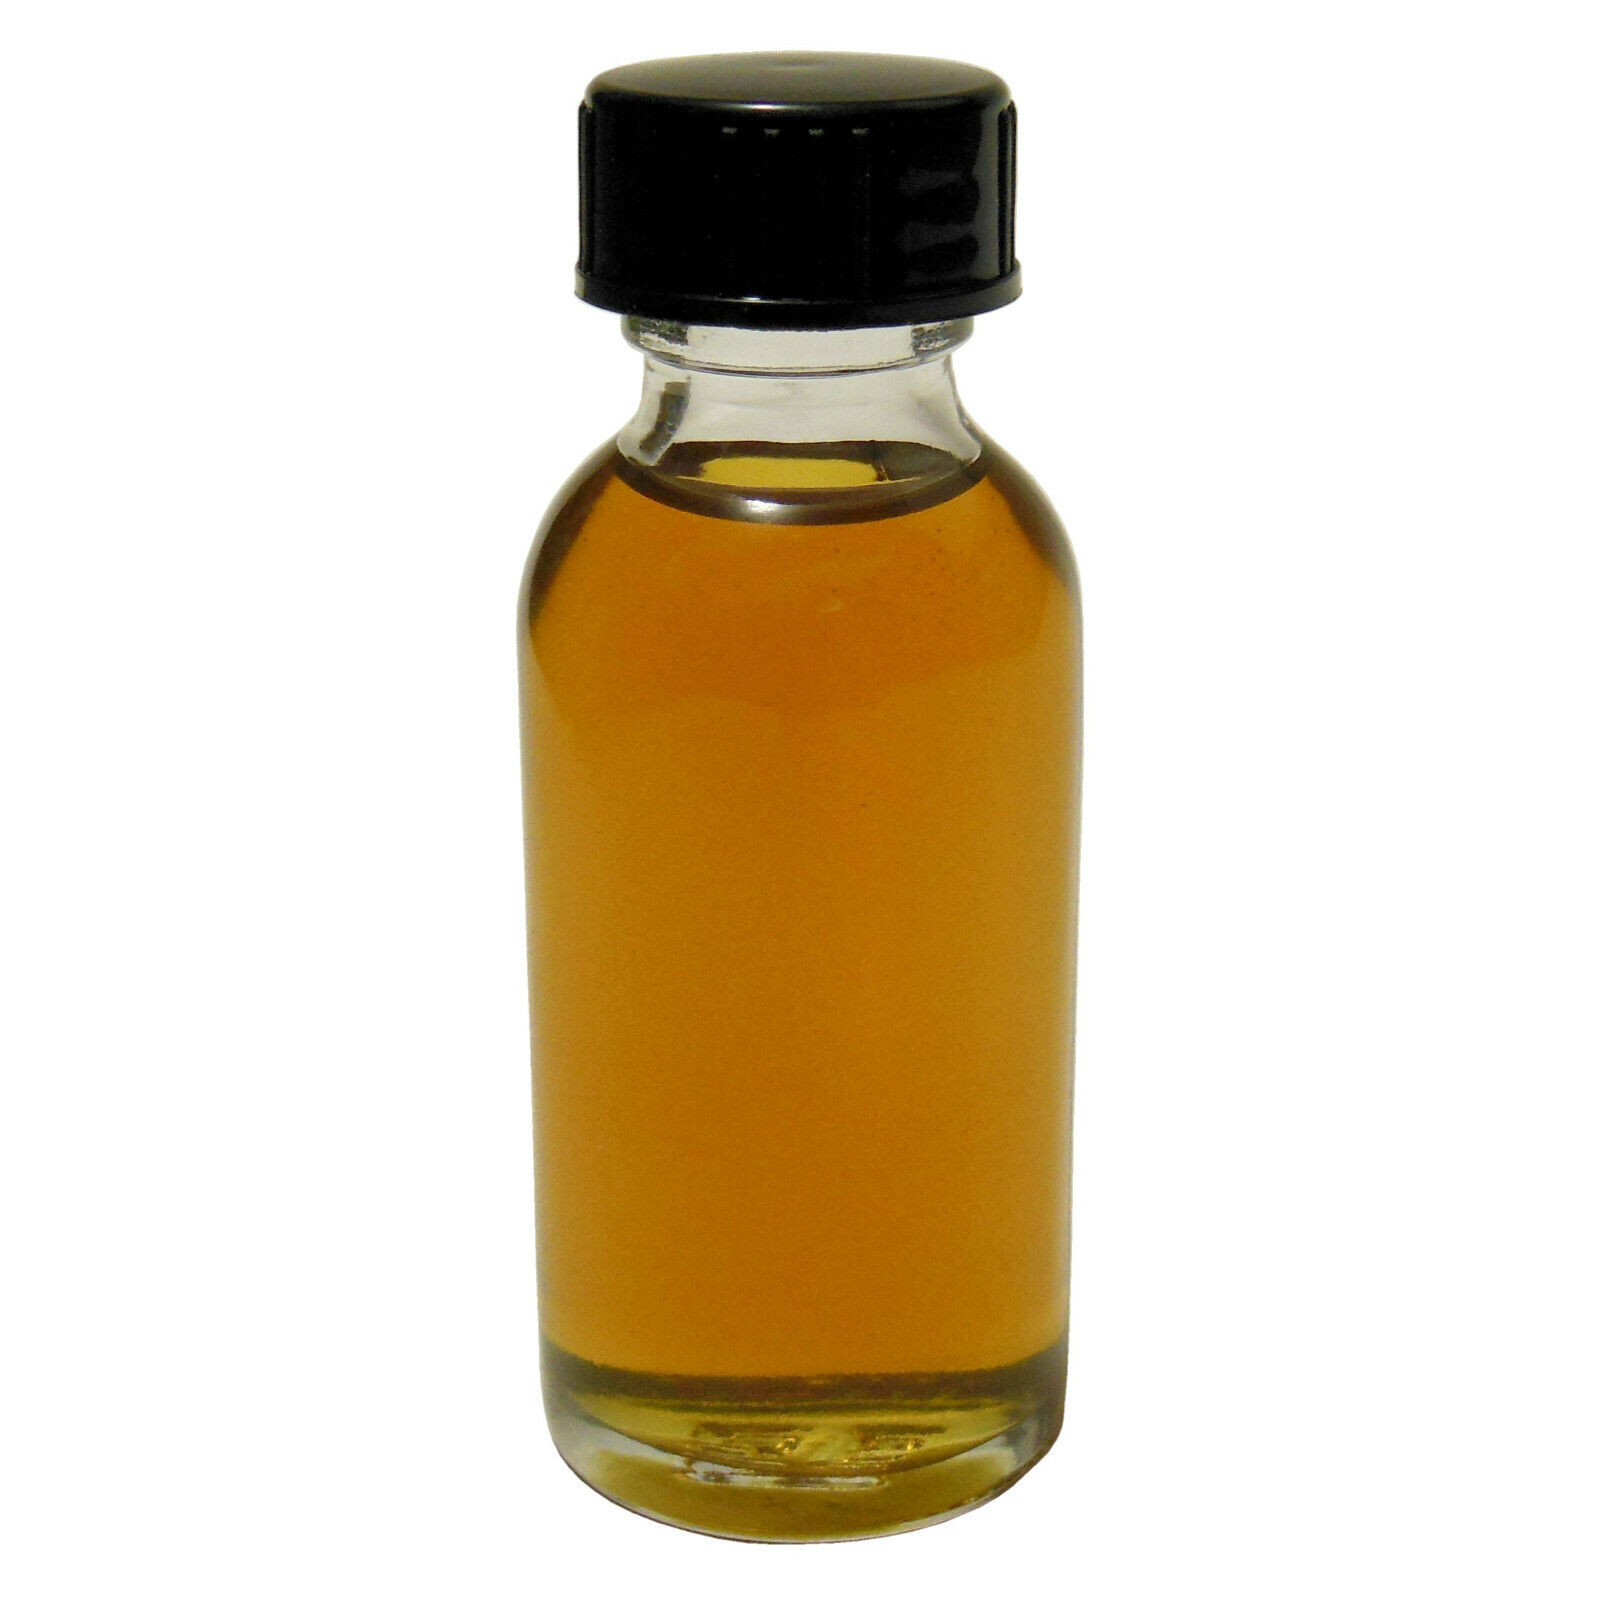 New 100% Synthetic Light Clock Oil for Cuckoo/Grandfather/Mantel Pivots 1oz/30ml